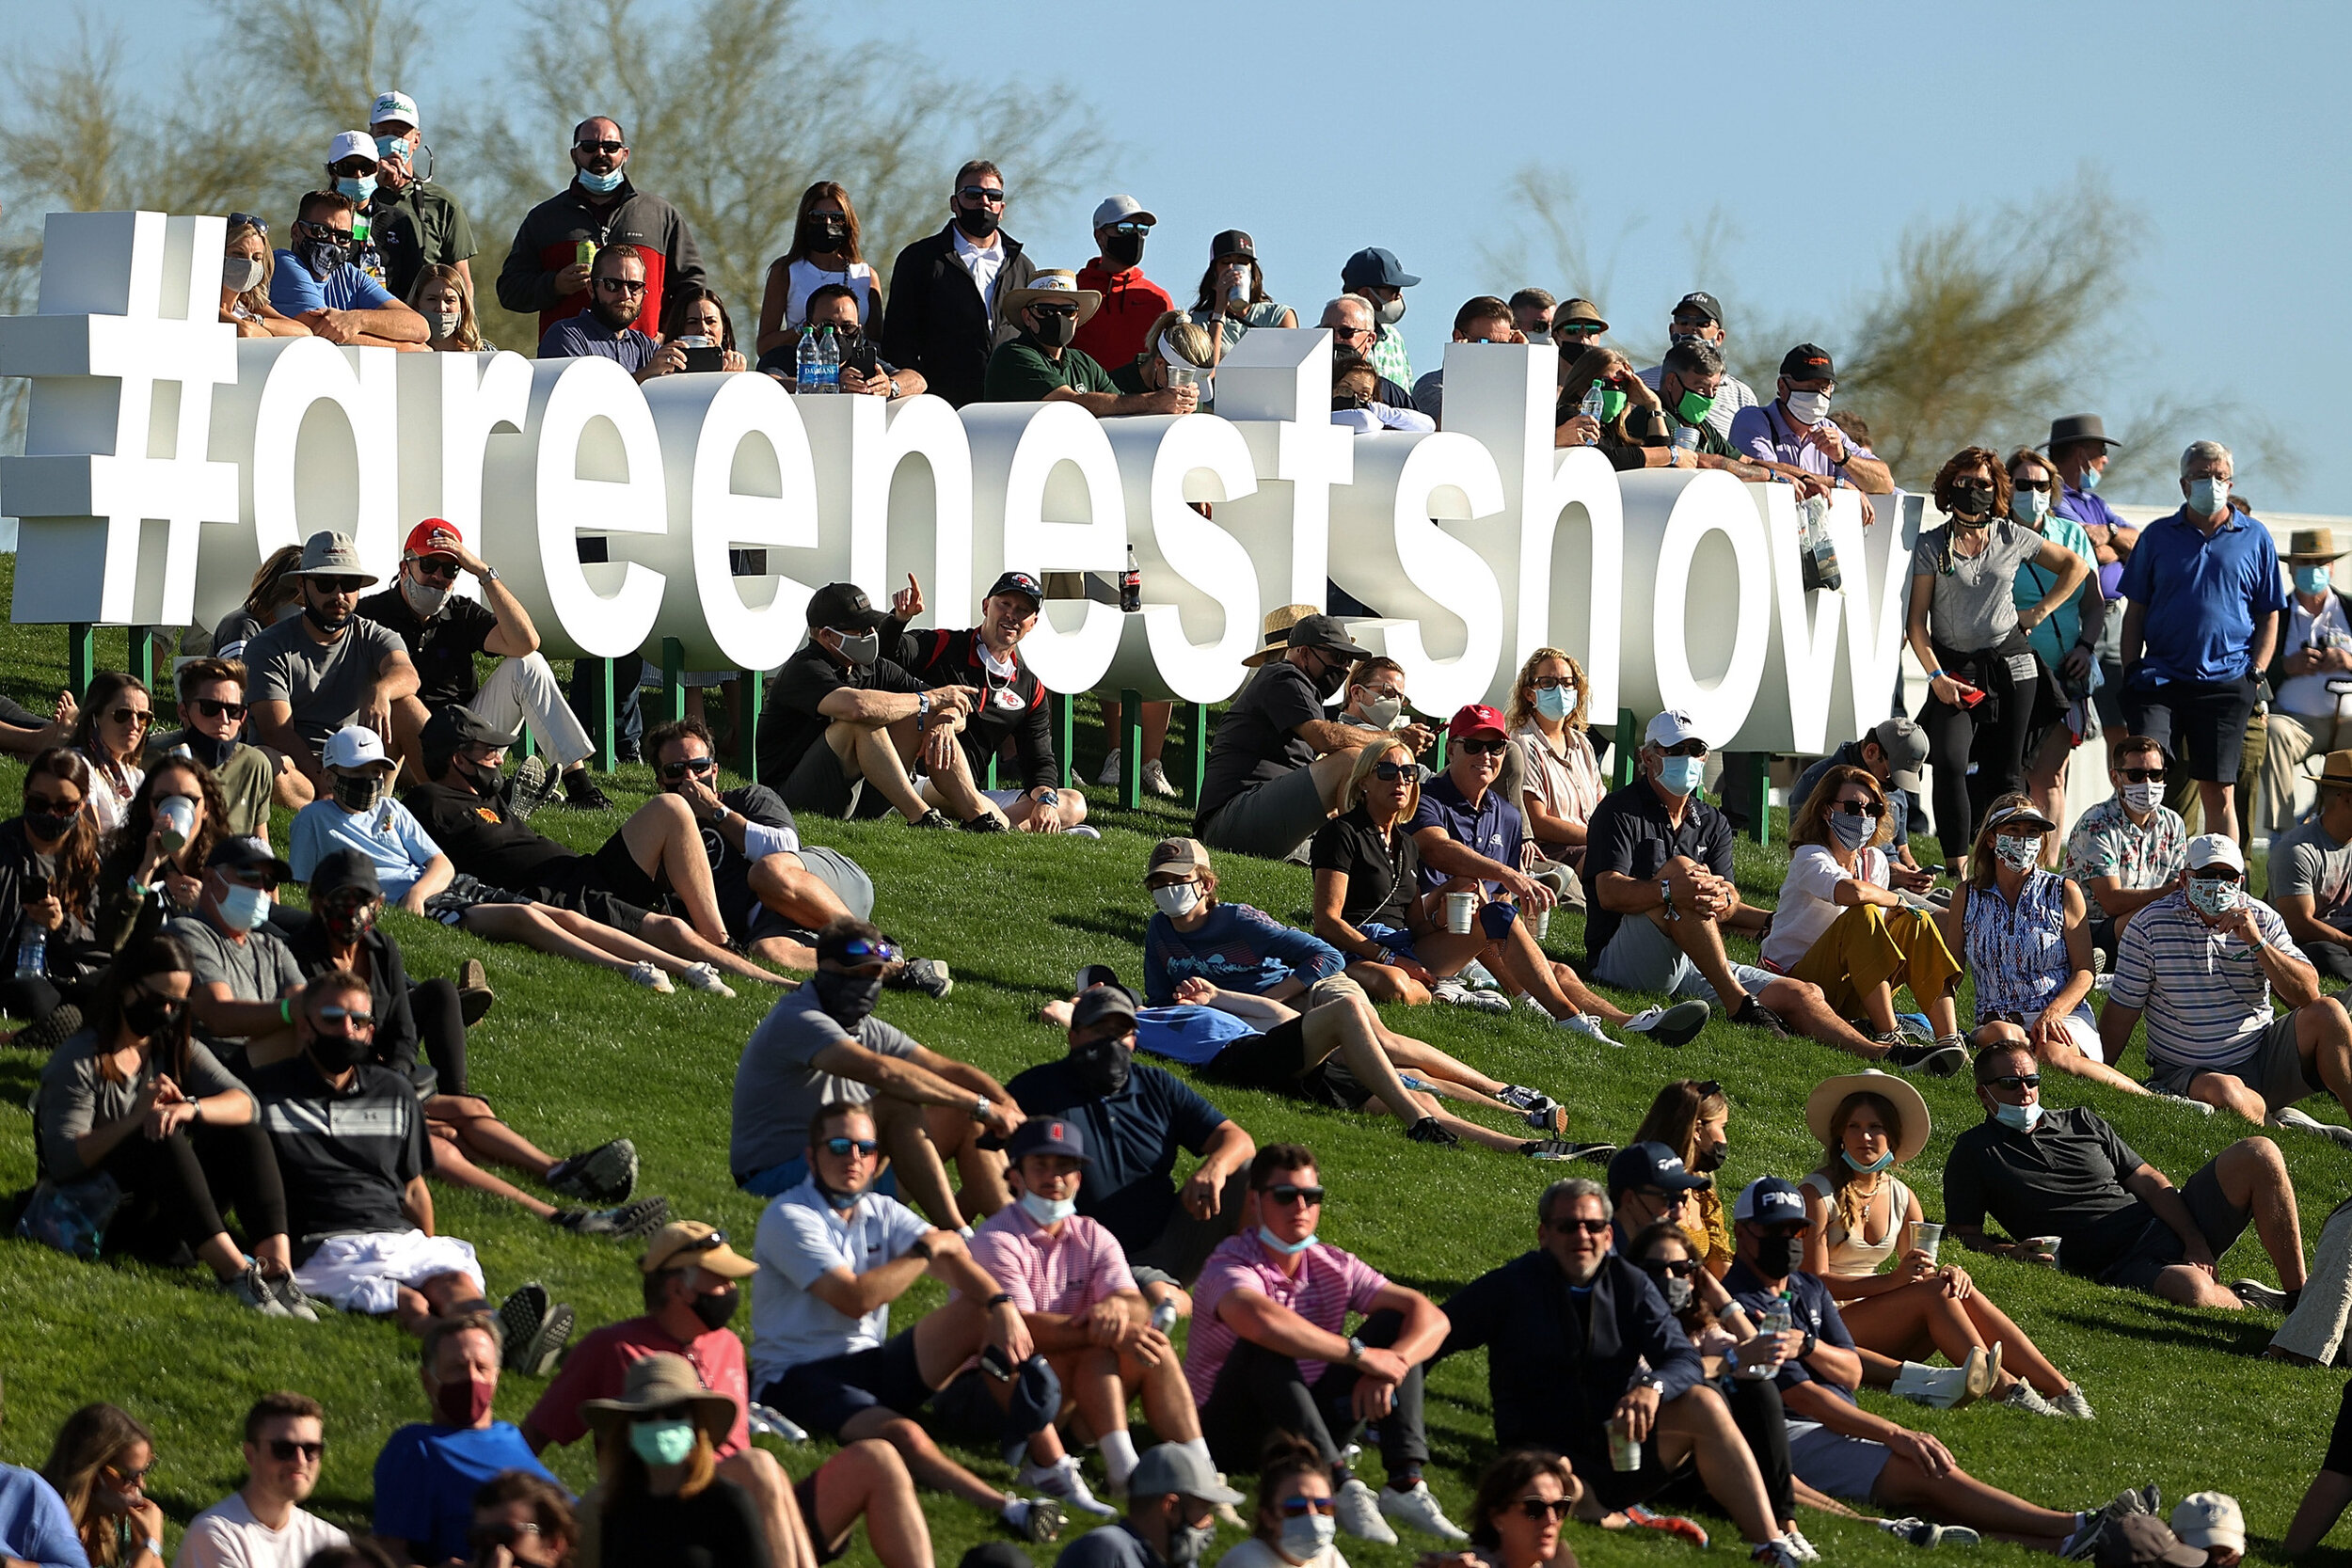  SCOTTSDALE, ARIZONA - FEBRUARY 06: Fans watch action during the third round of the Waste Management Phoenix Open at TPC Scottsdale on February 06, 2021 in Scottsdale, Arizona. In what is normally considered "The People's Open", crowds were drastical